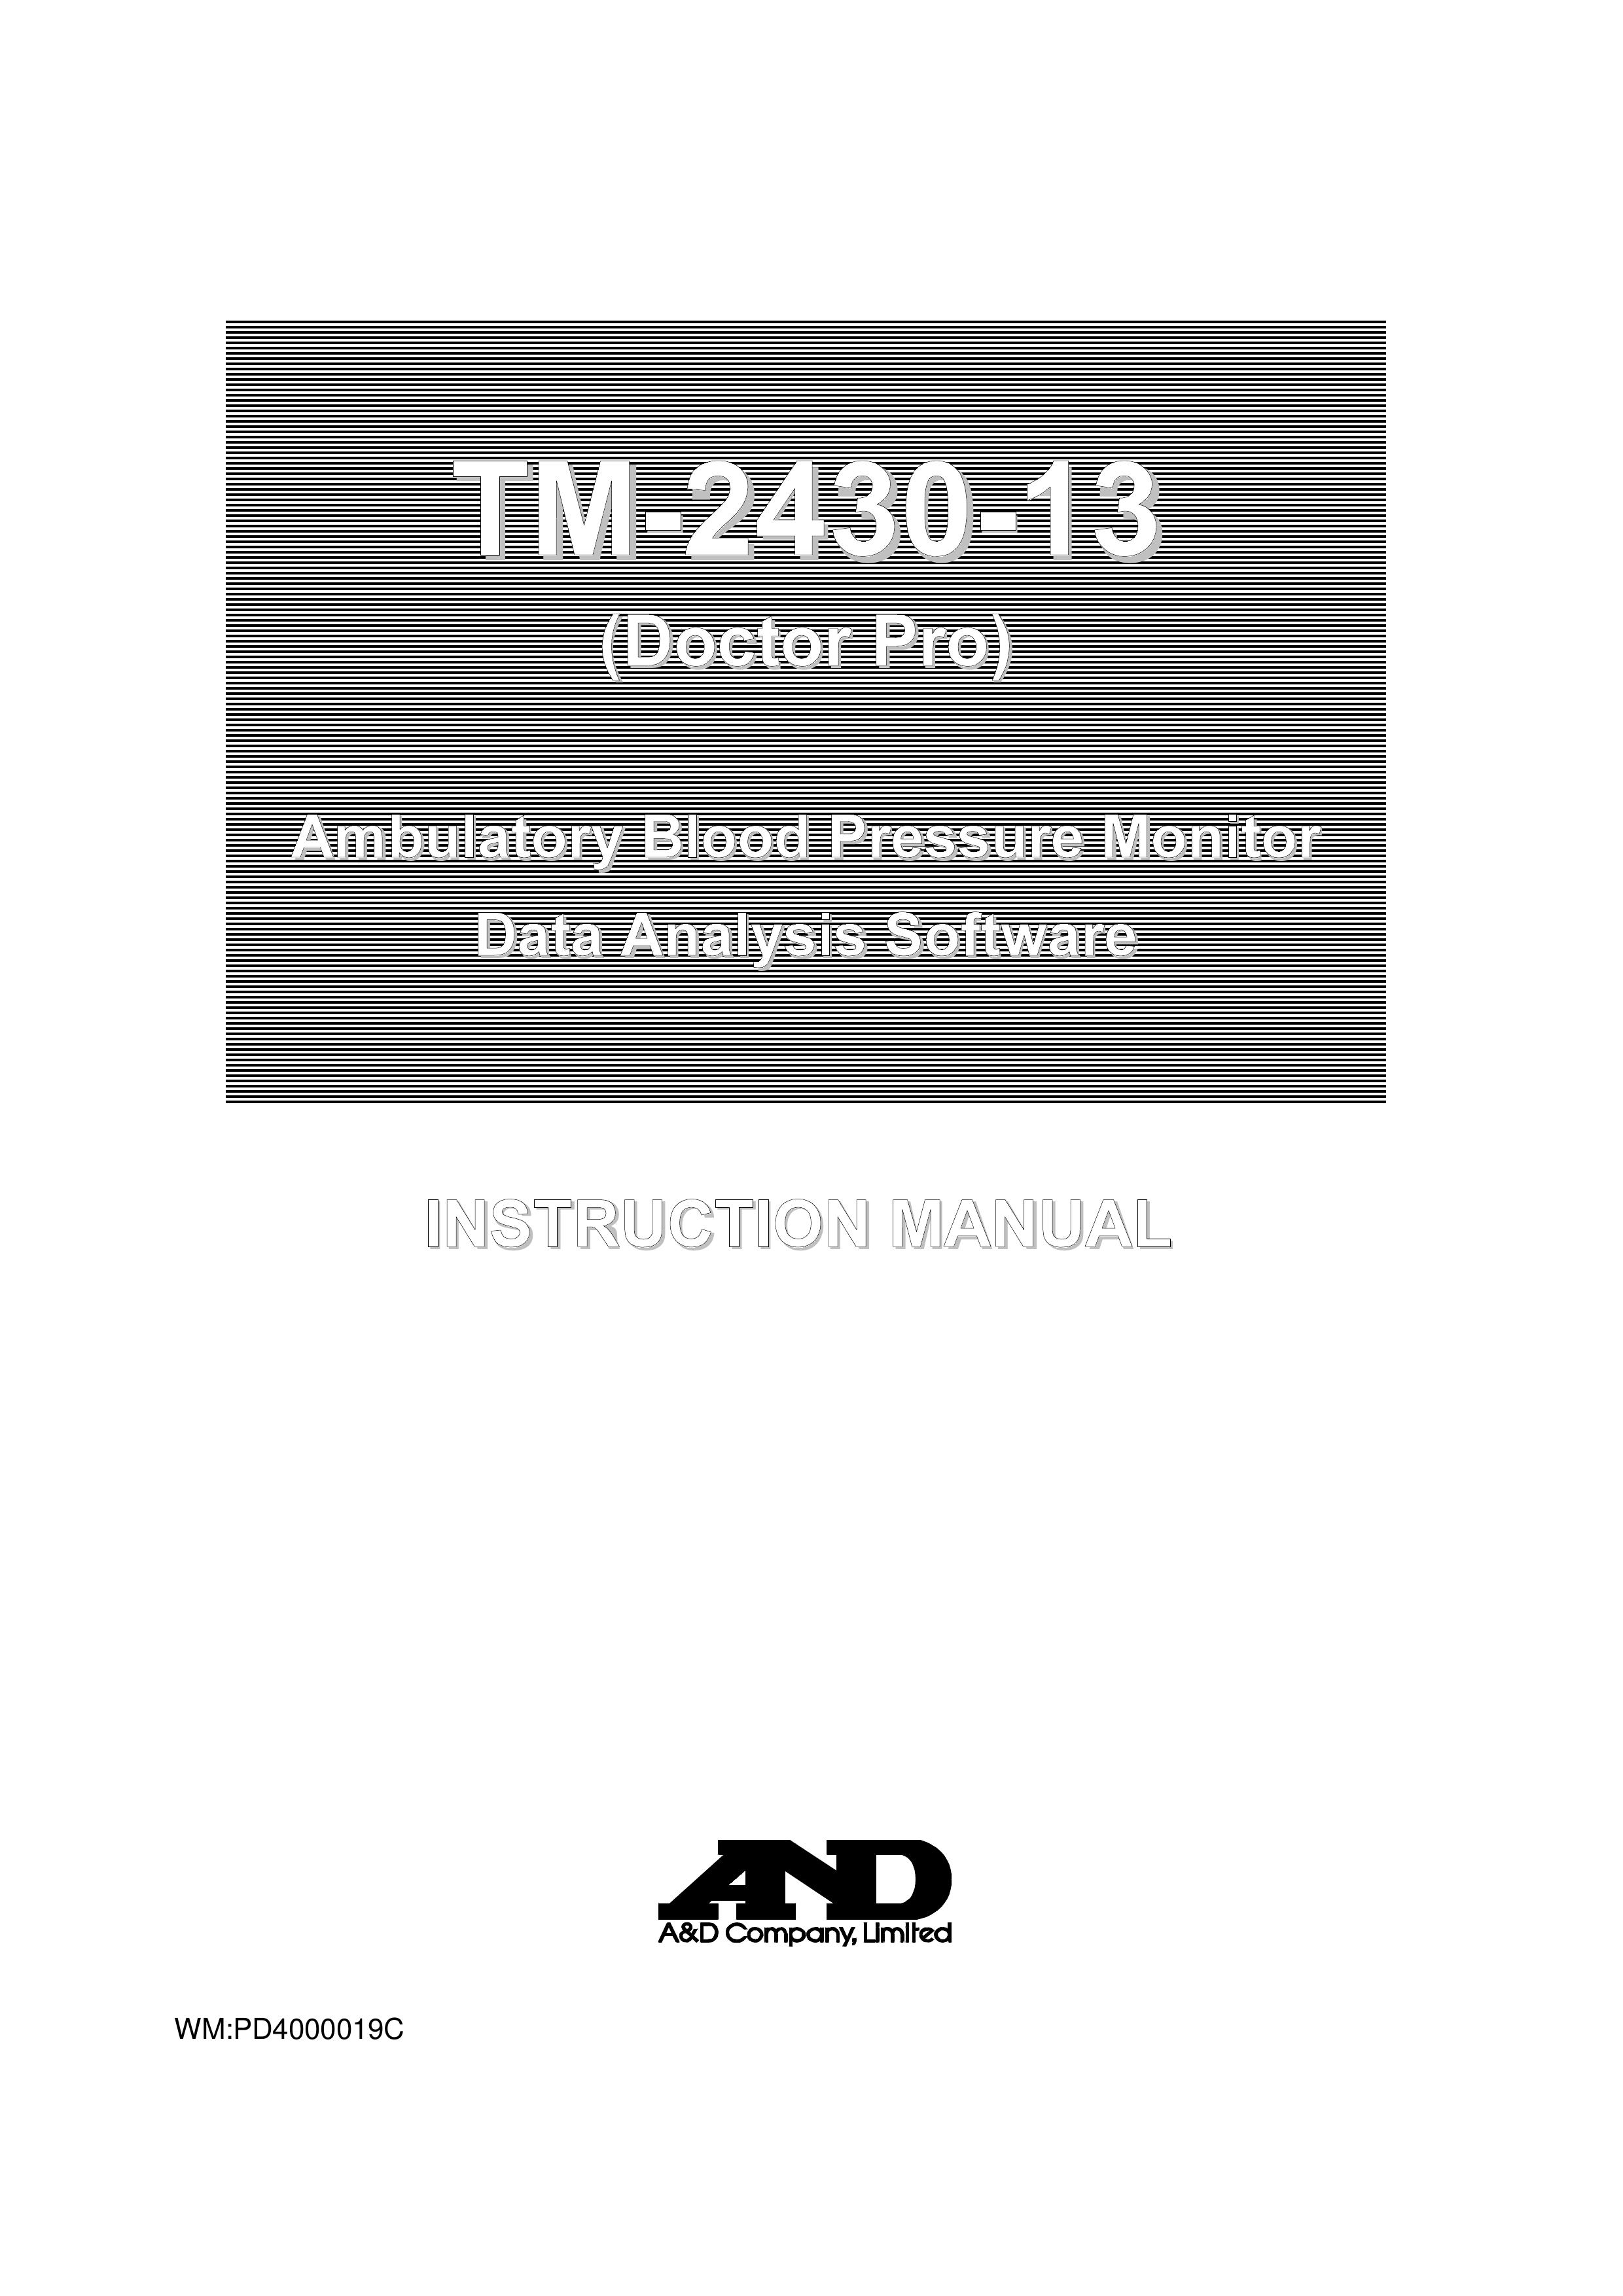 A&D TM-2430-13 Blood Pressure Monitor User Manual (Page 1)